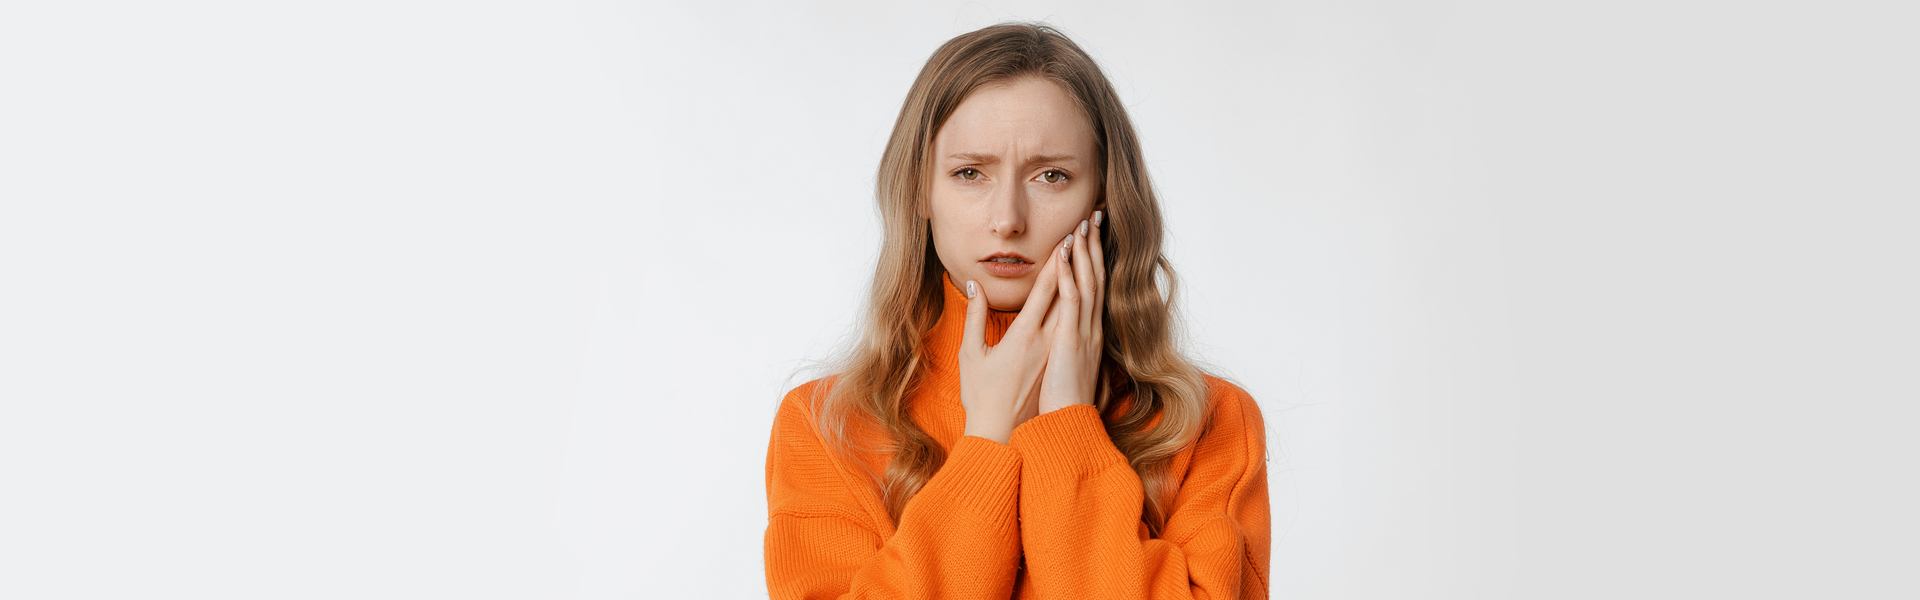 Emergency Dentist: can the dental clinic do anything for tooth pain?